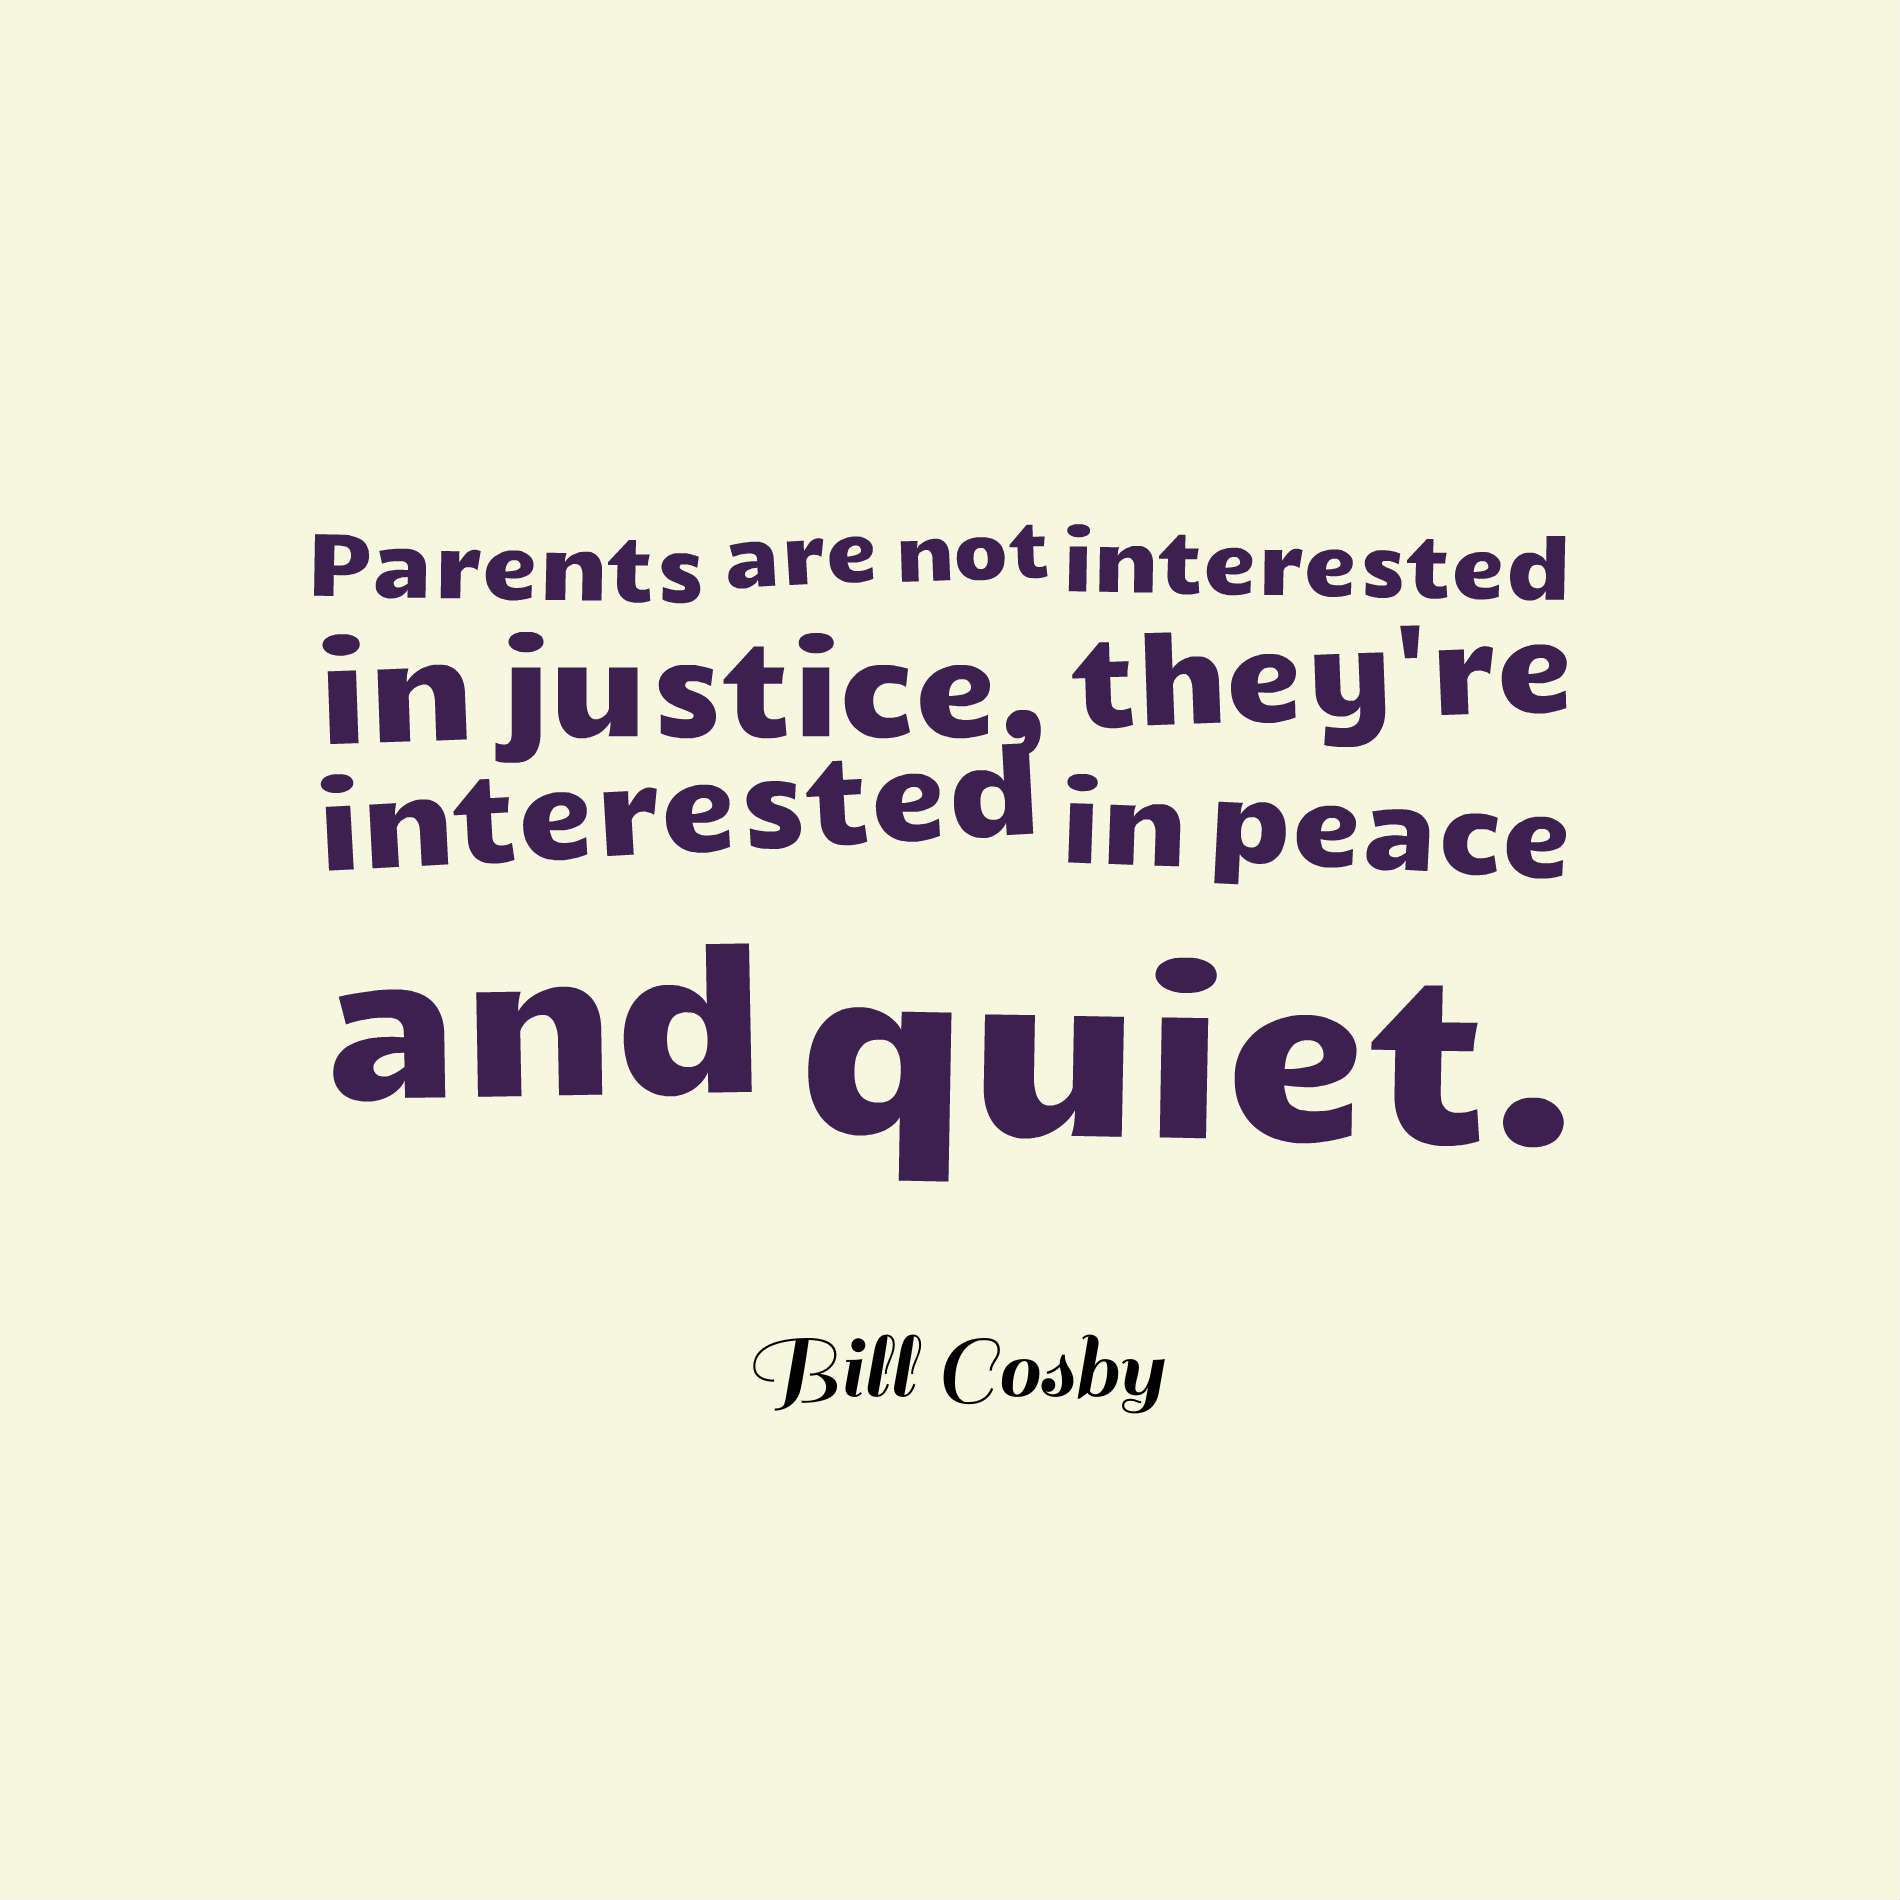 Parents are not interested in justice, they're interested in peace and quiet.